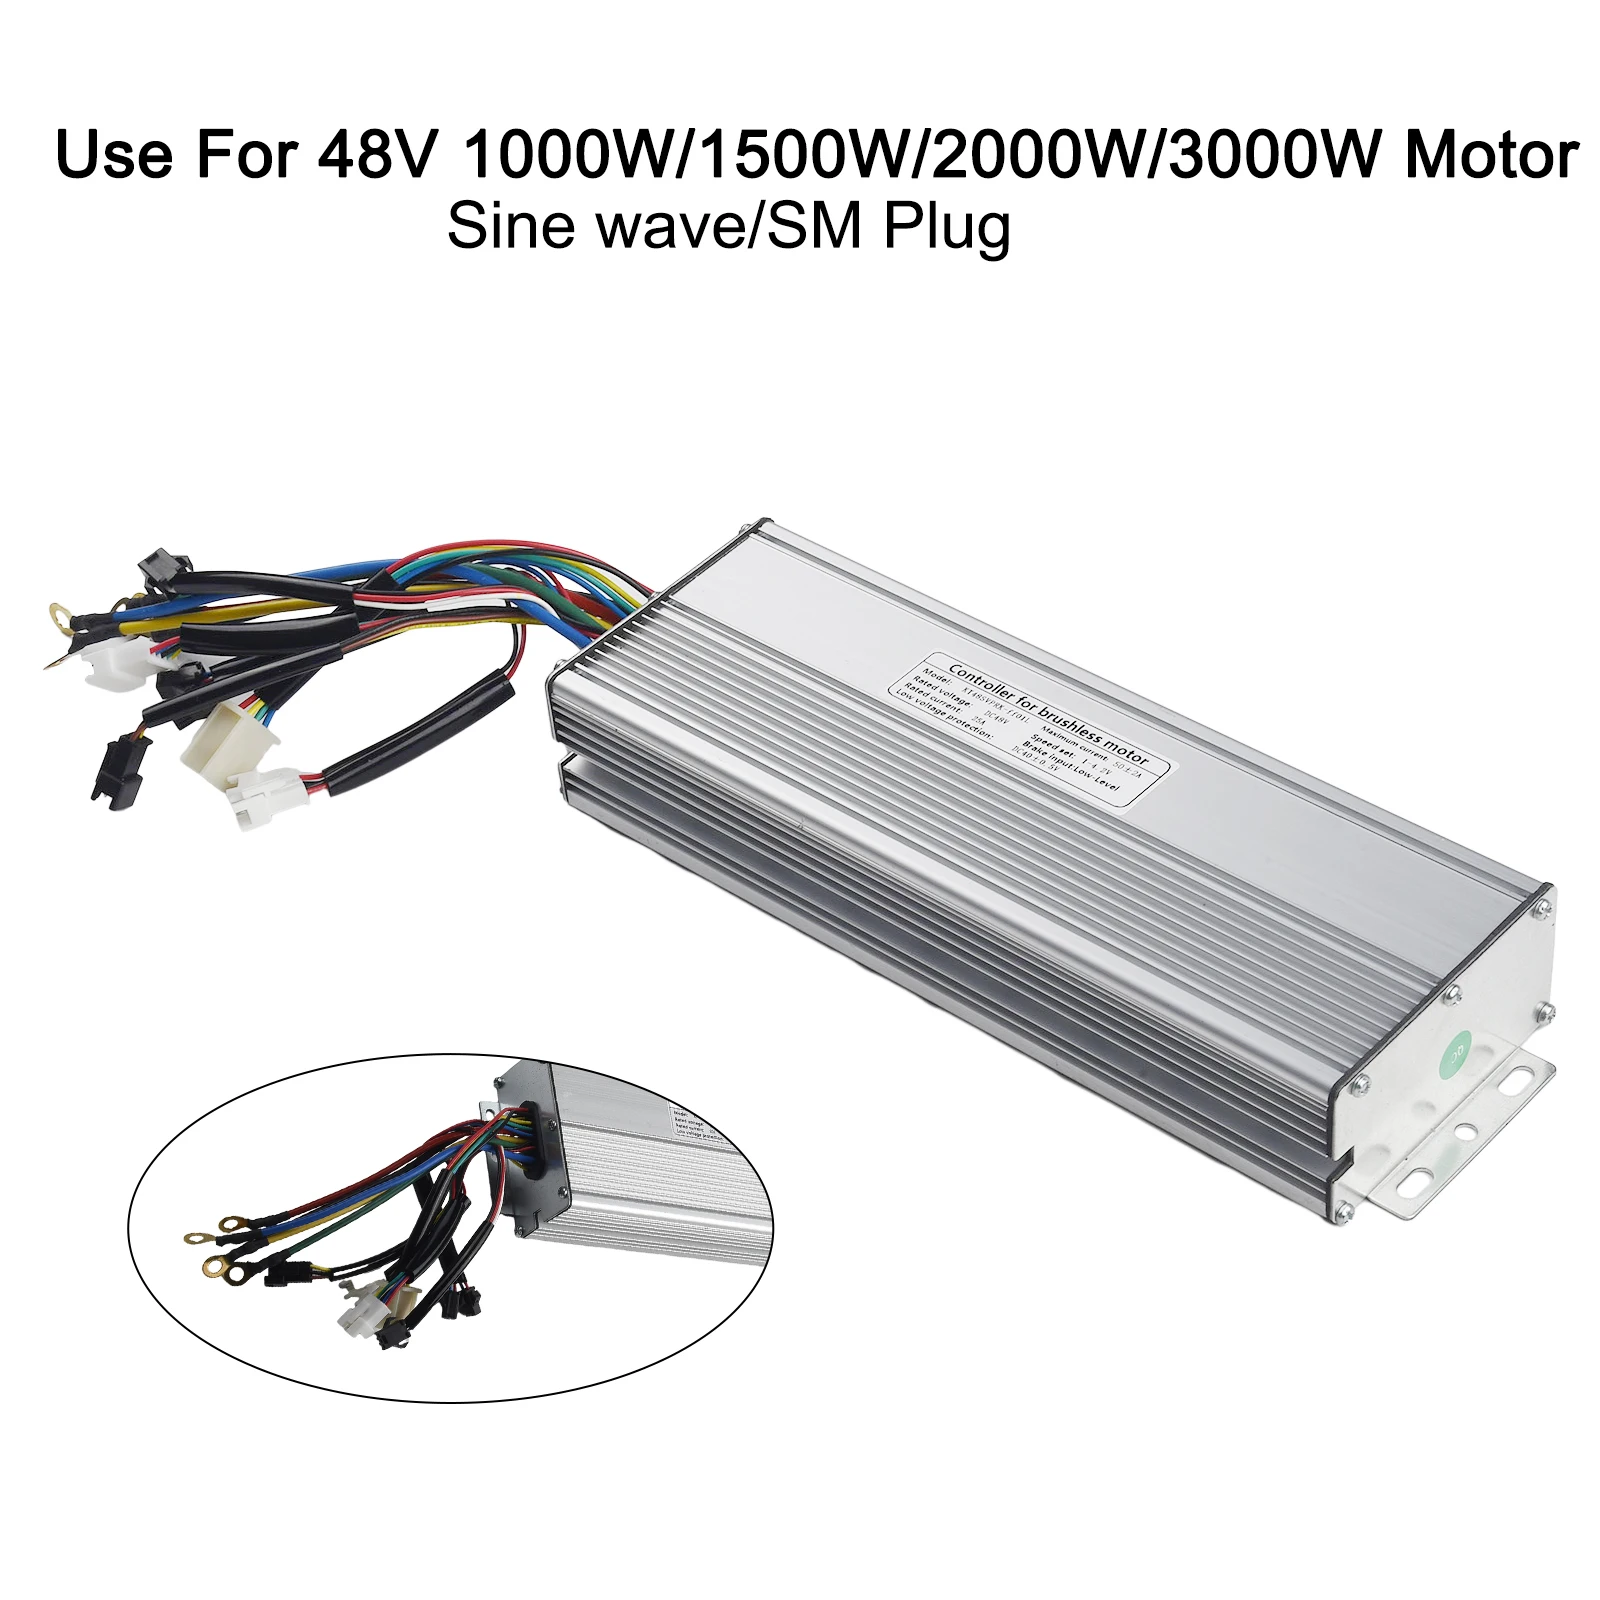 

48V 50A MTB Ebike Sinewave Controller With Light Line For 1500W/2000W/3000W Brushless Motor KT Series Controller Bike Modified